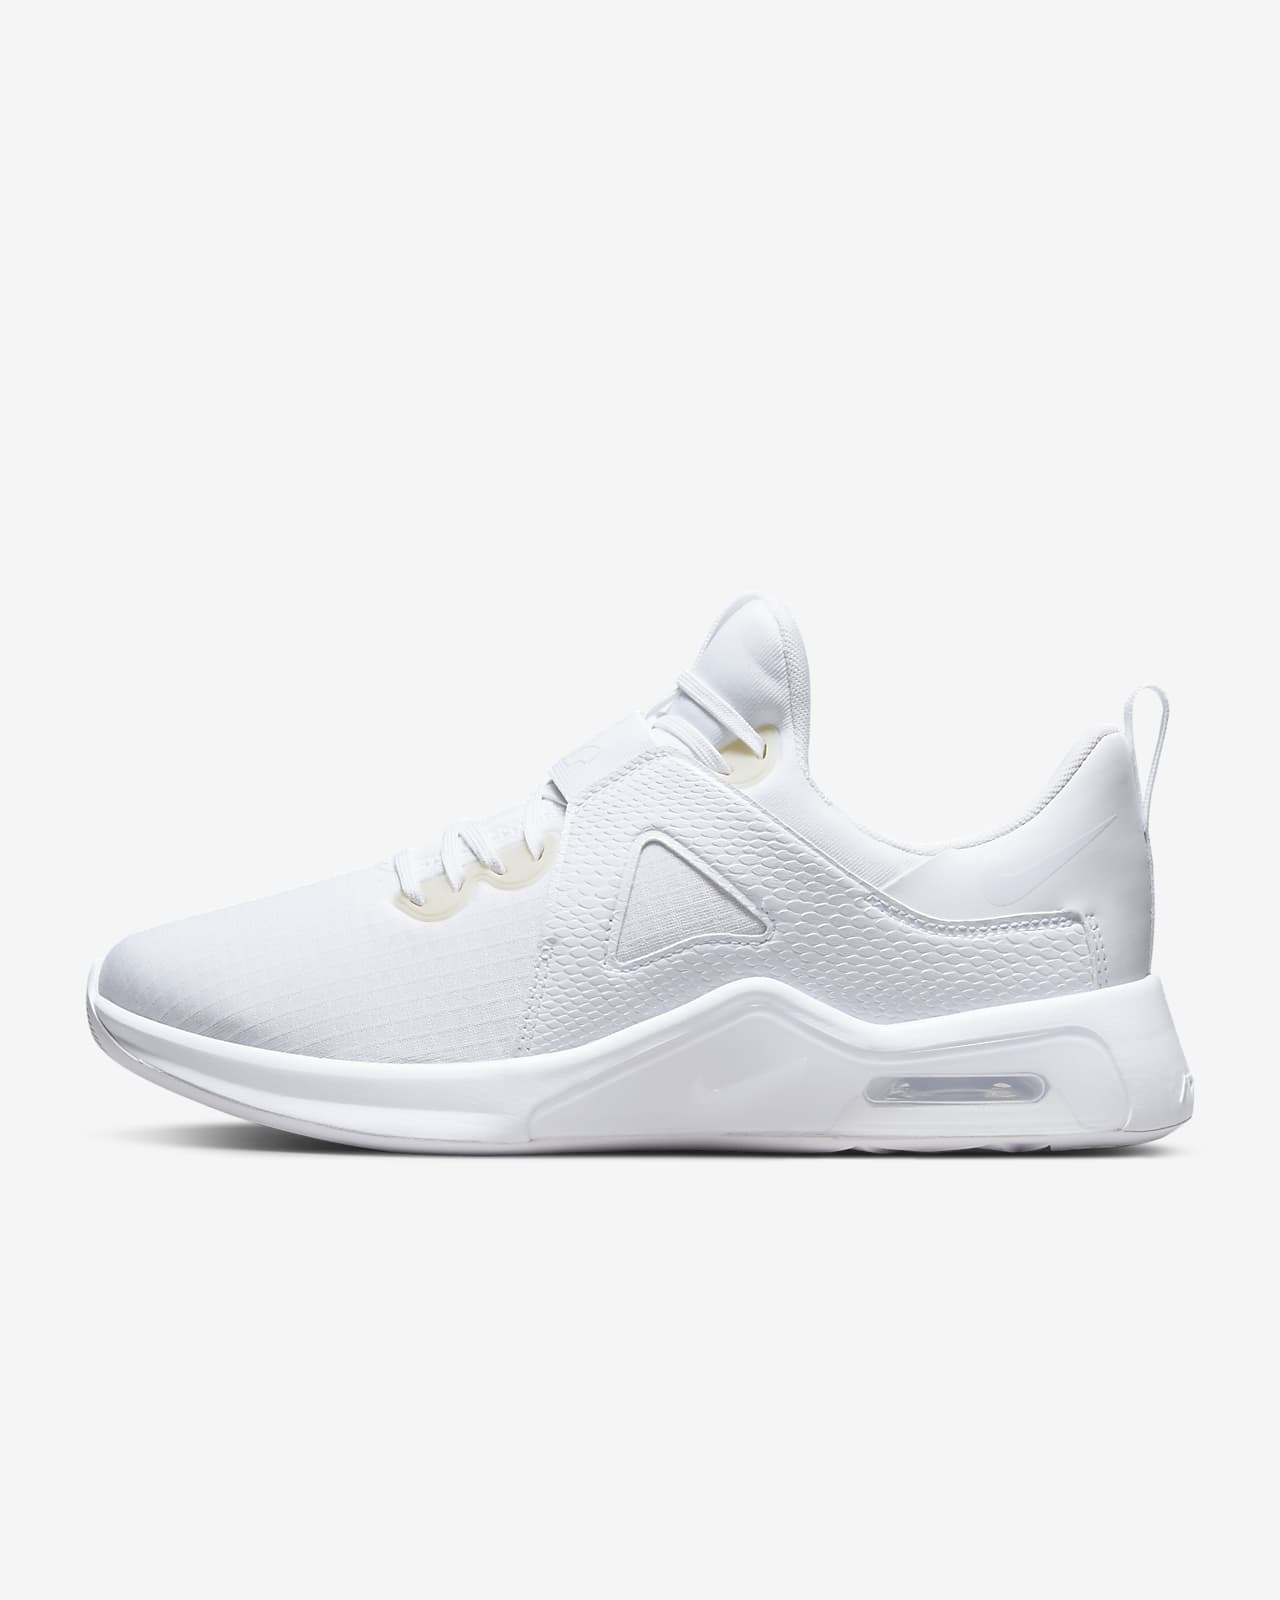 Nike Air Max Bella TR 5 Women's Workout Shoes